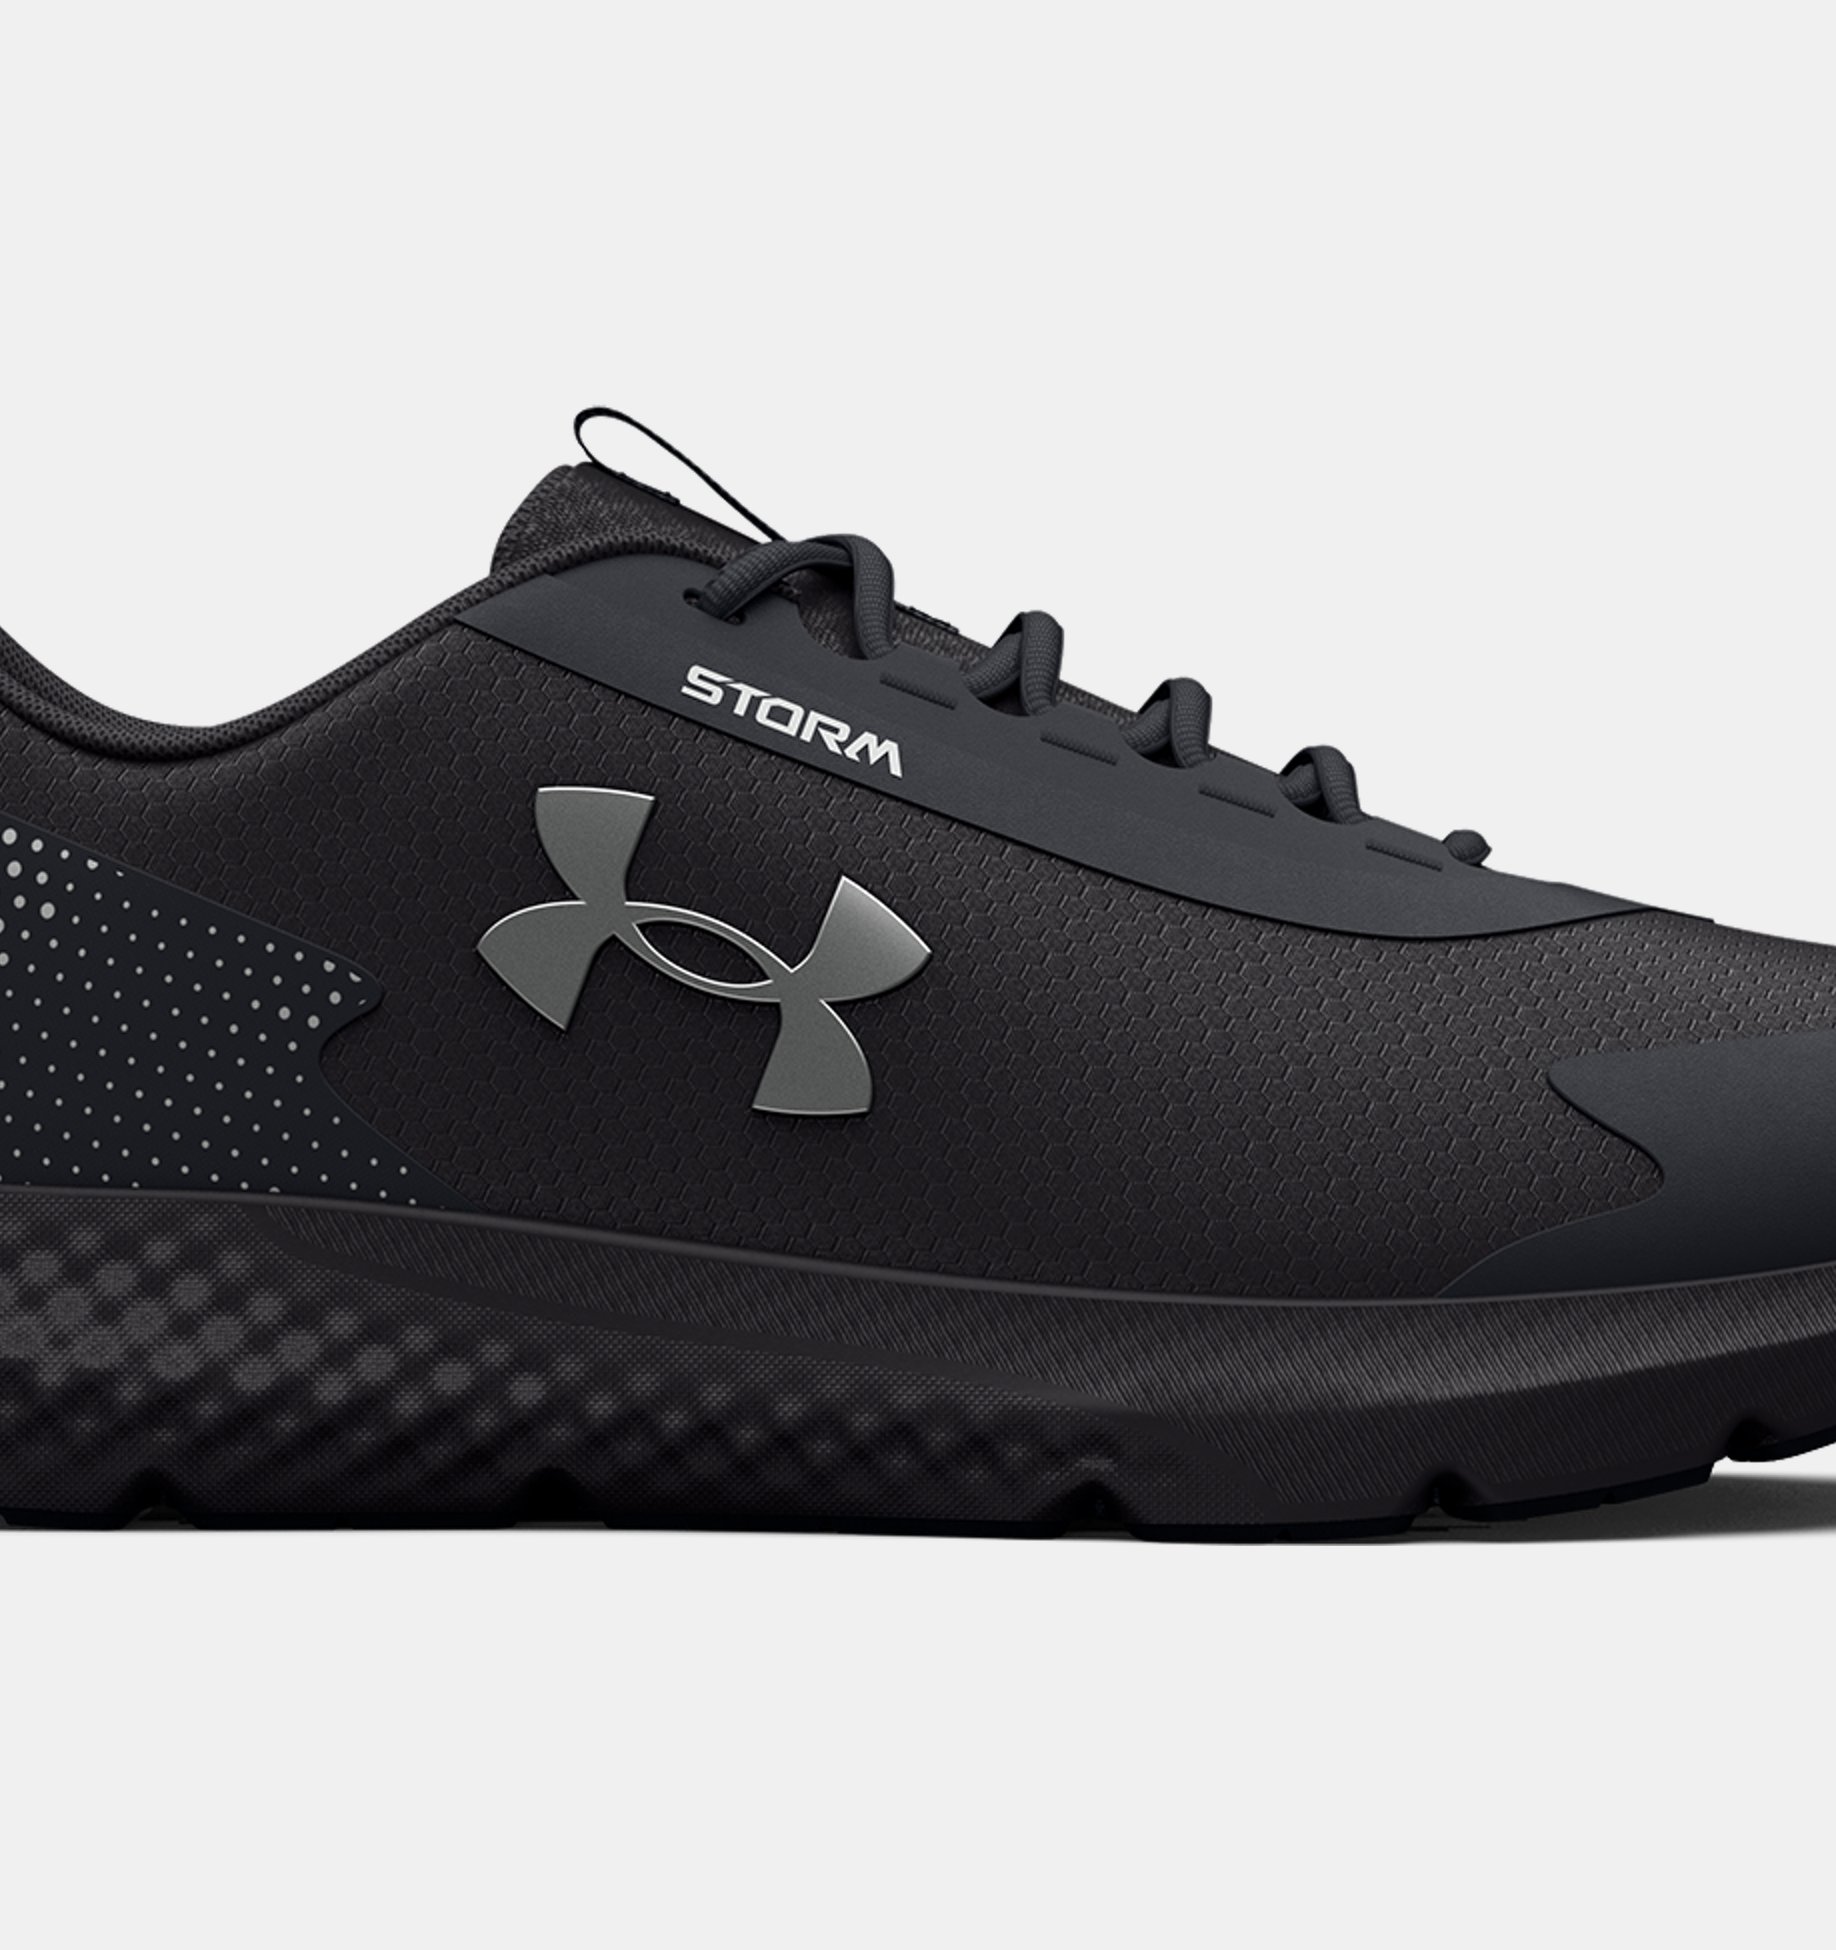 Ténis Under Armour Charged Rogue 3 Storm mulher